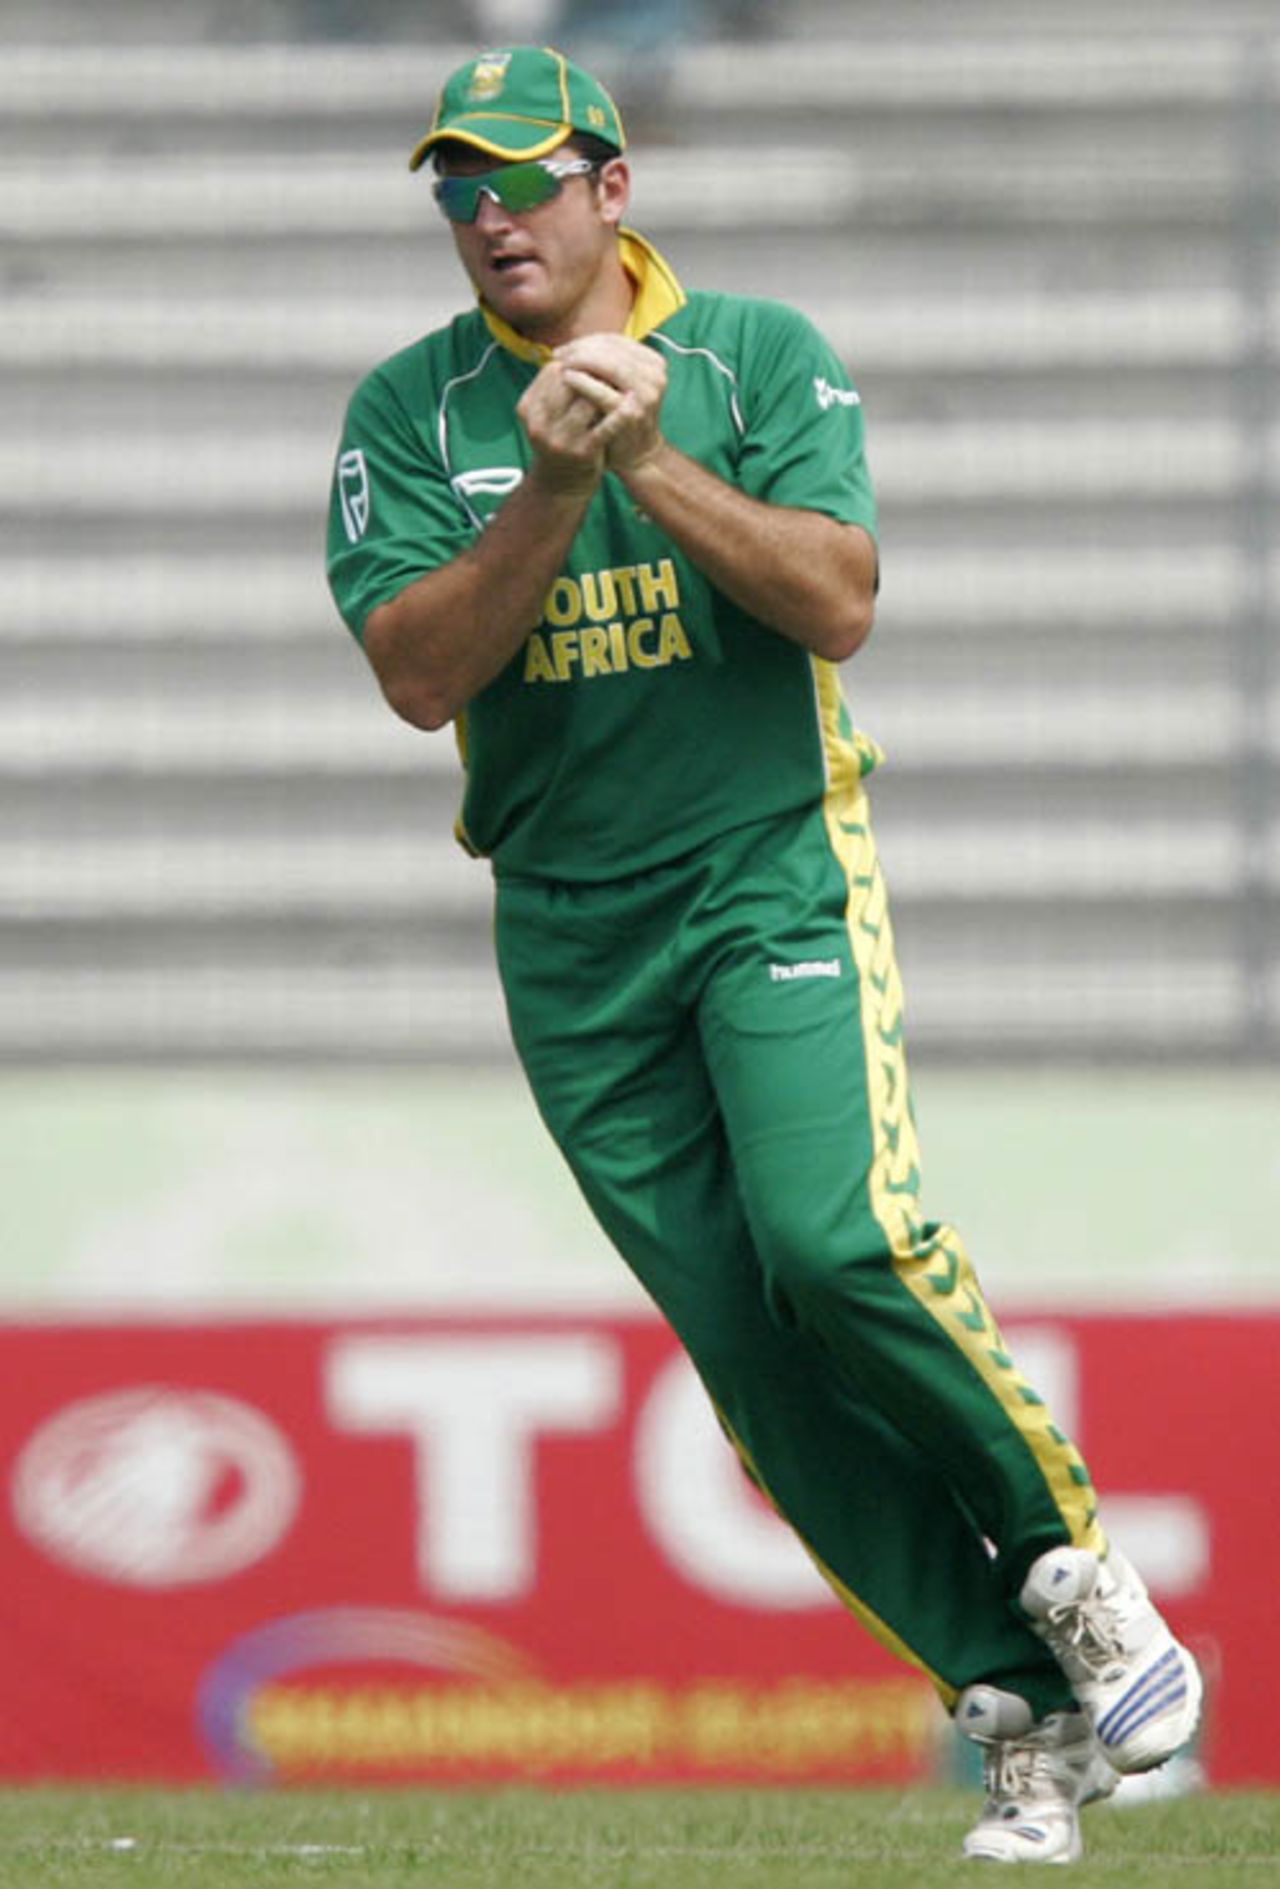 Graeme Smith takes a catch offered by Nazimuddin, Bangladesh v South Africa, 3rd ODI, Mirpur, March 14, 2008 
